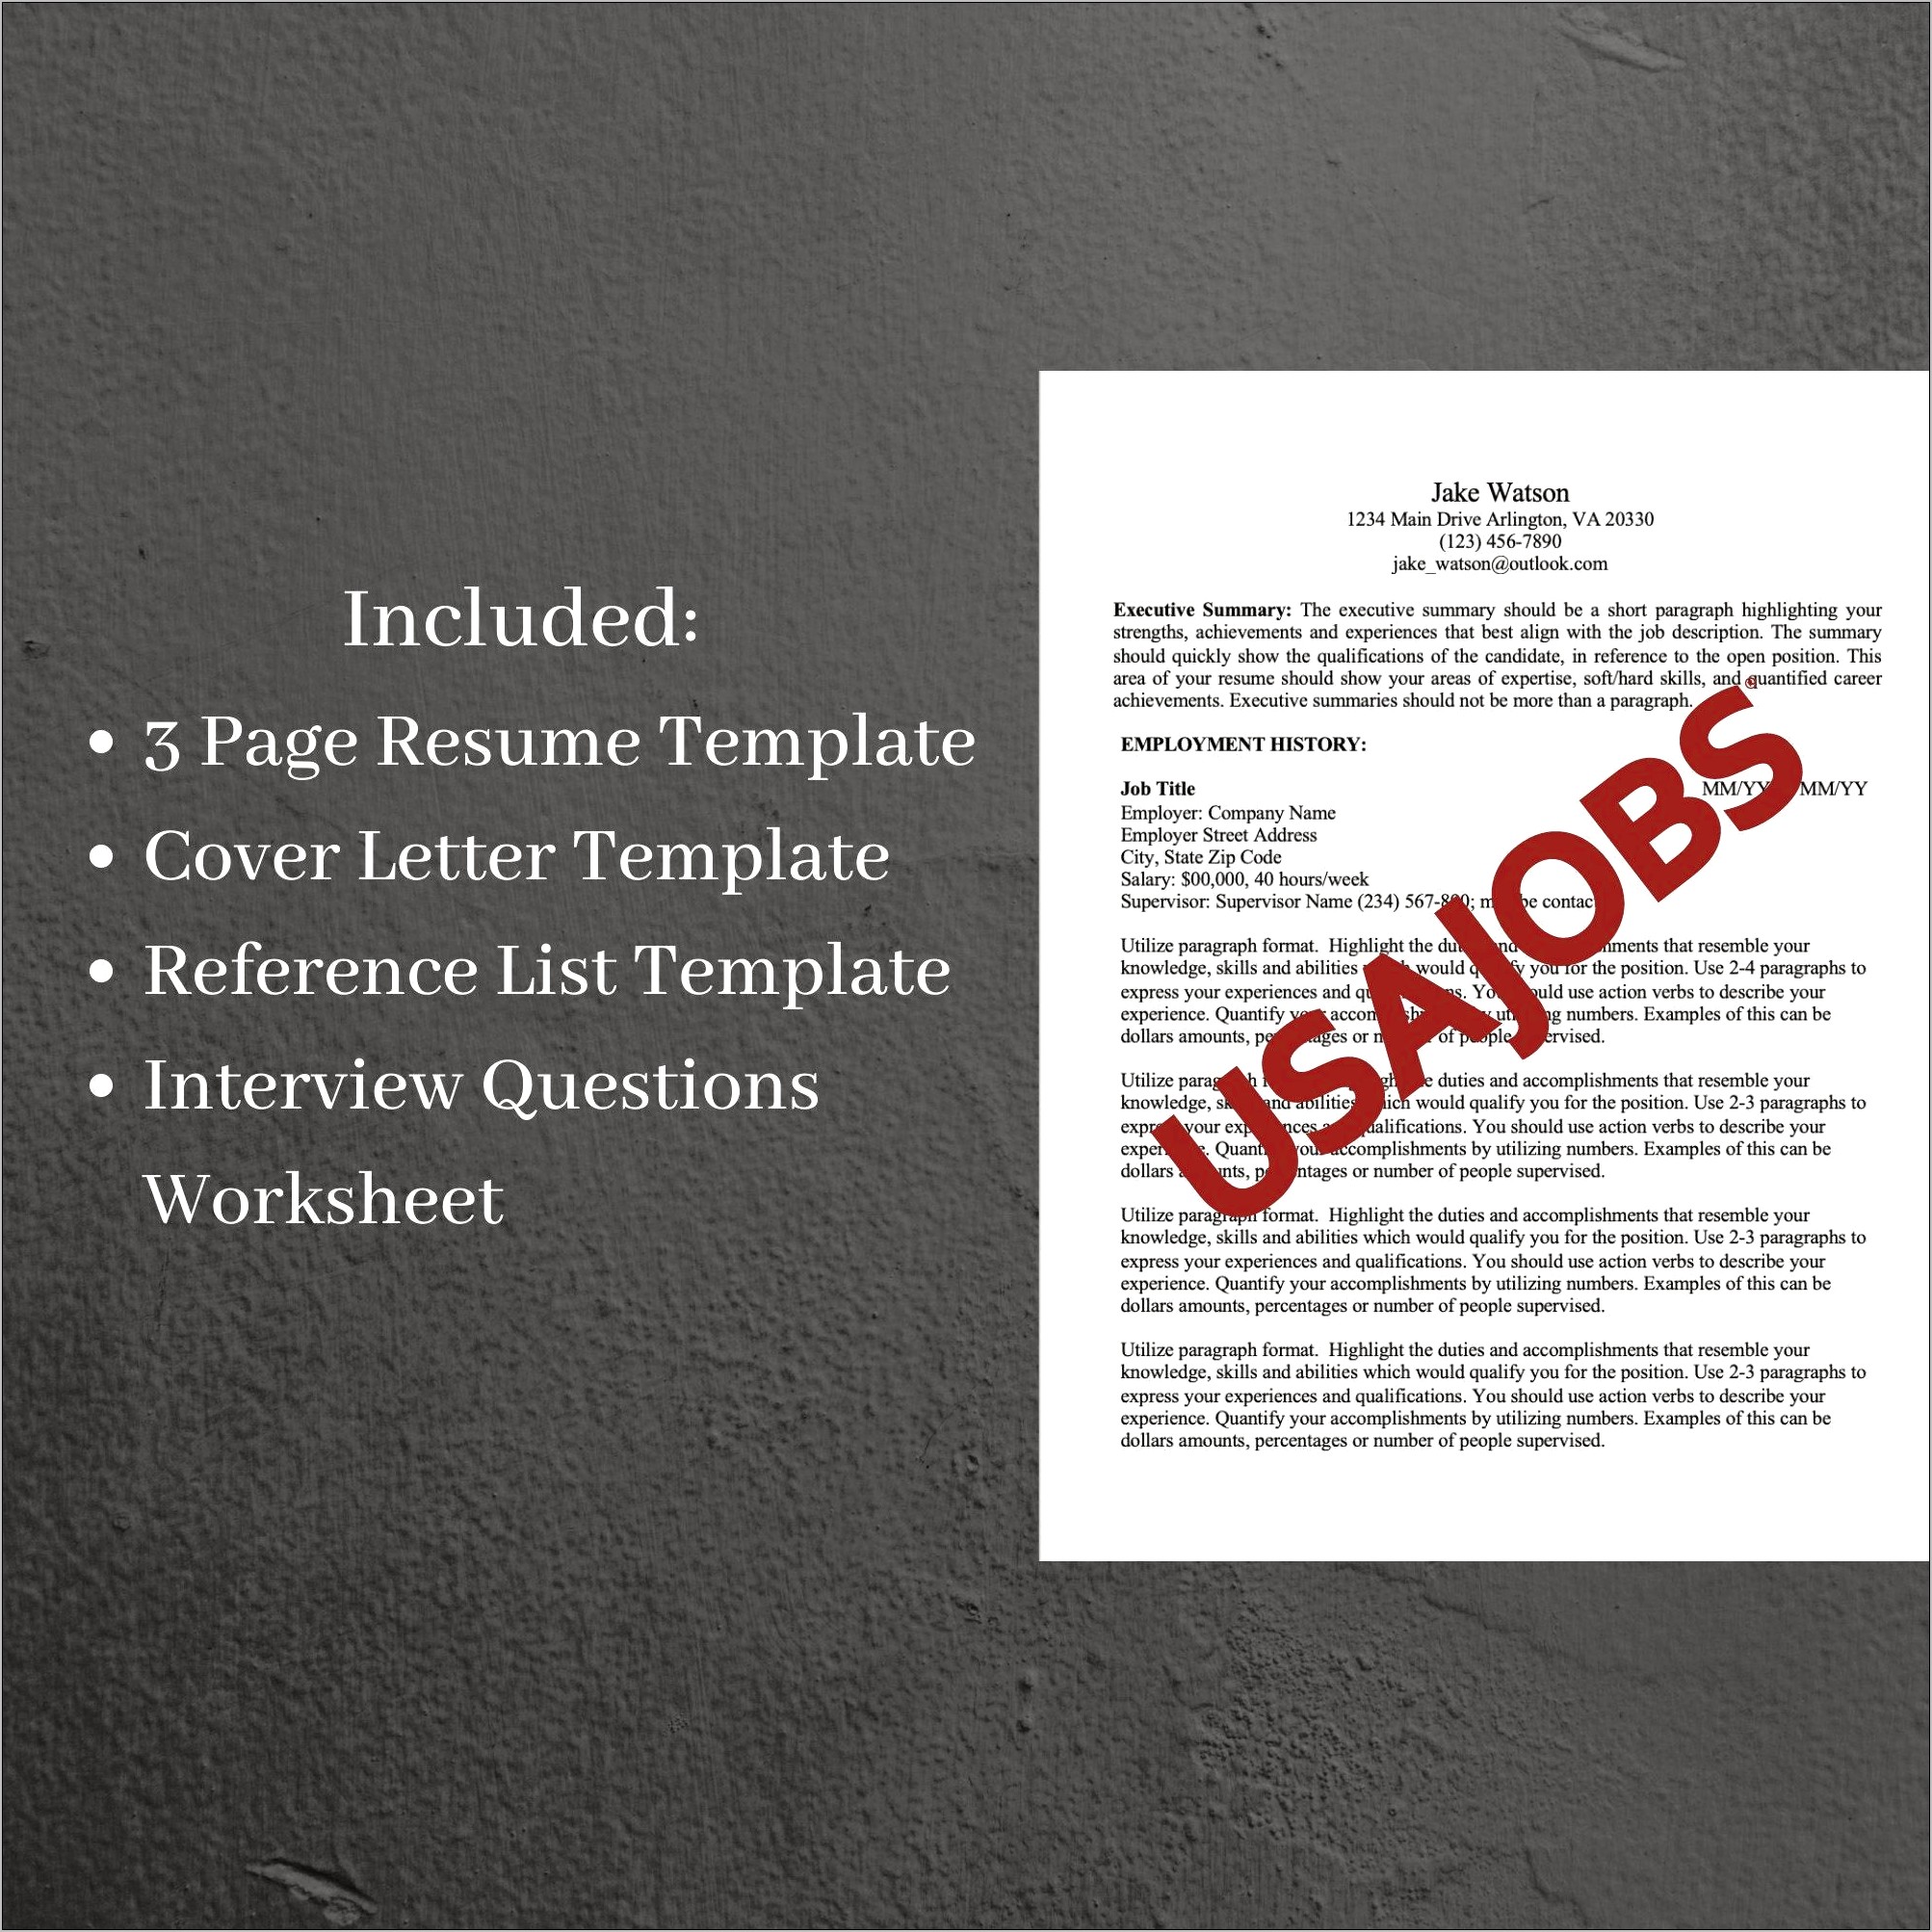 Examples Of Federal Job Resumes